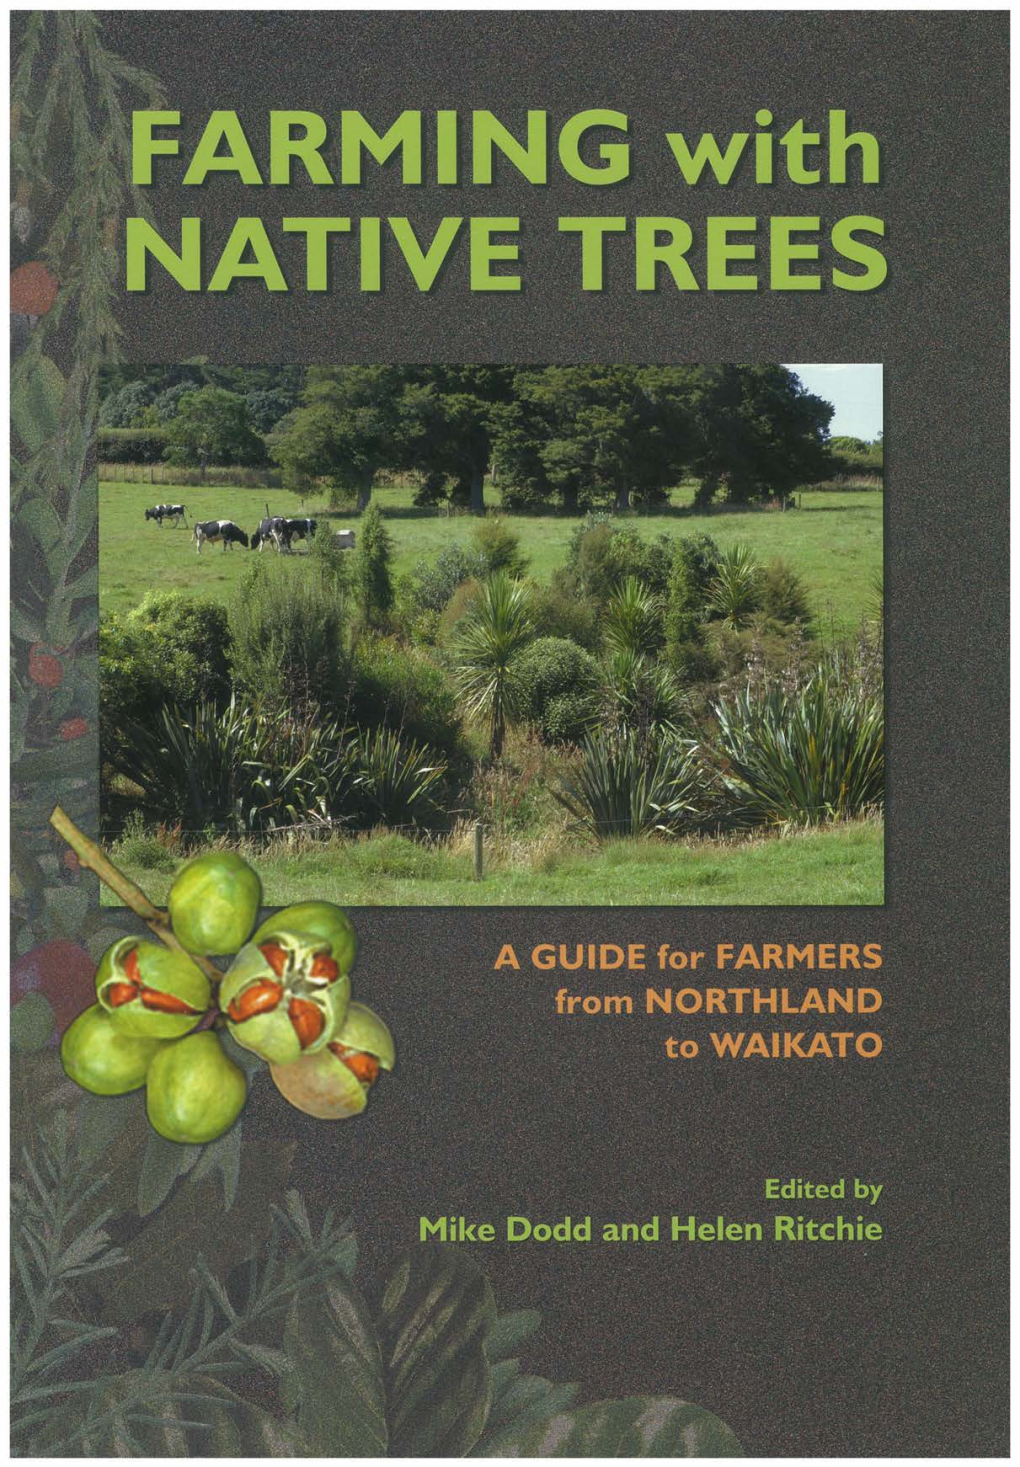 FARMING with NATIVE TREES a Guide for Farmers from Northland to Waikato